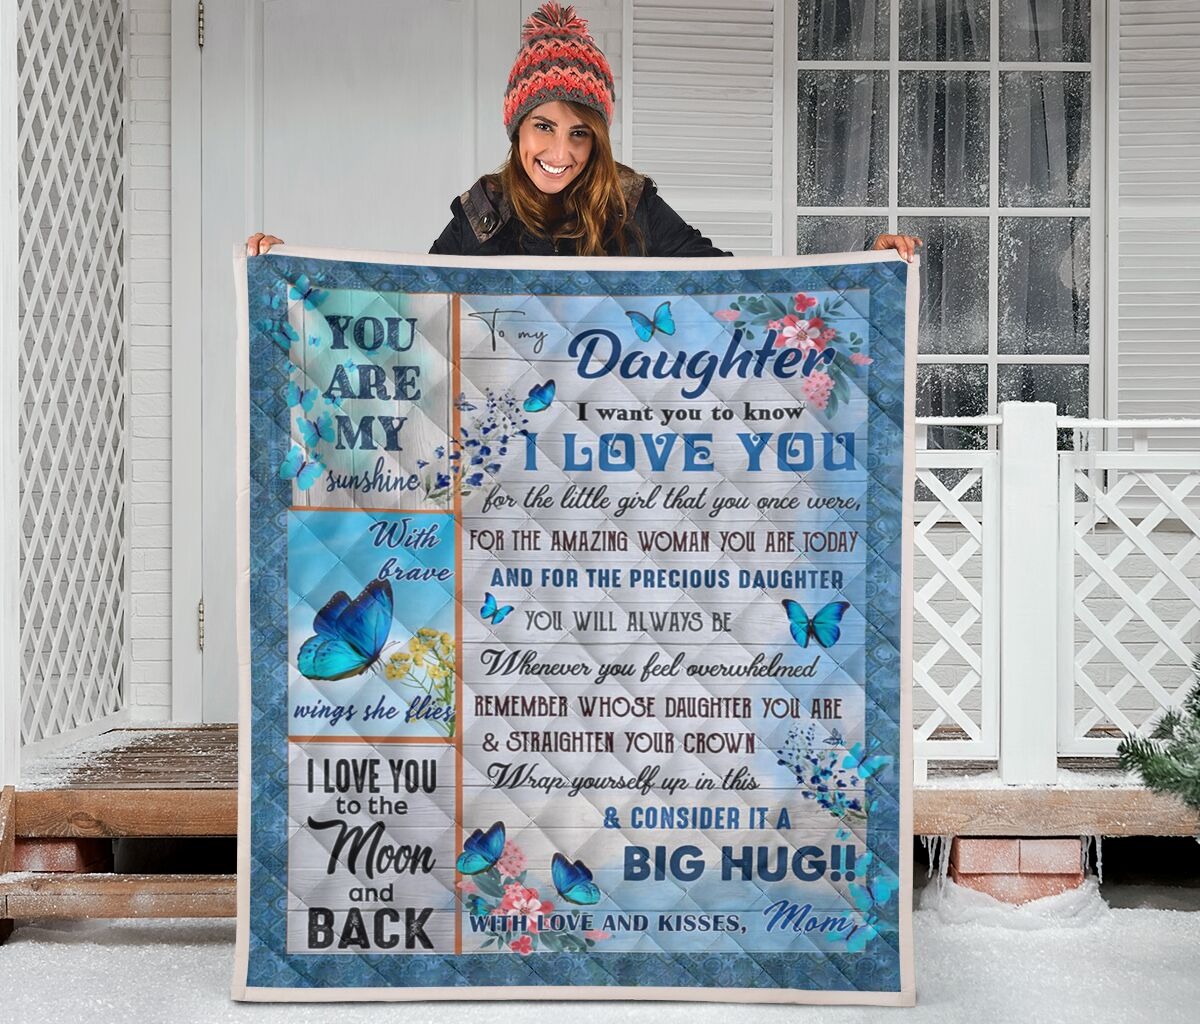 To my DaughterI want you to know I love you QUILT2